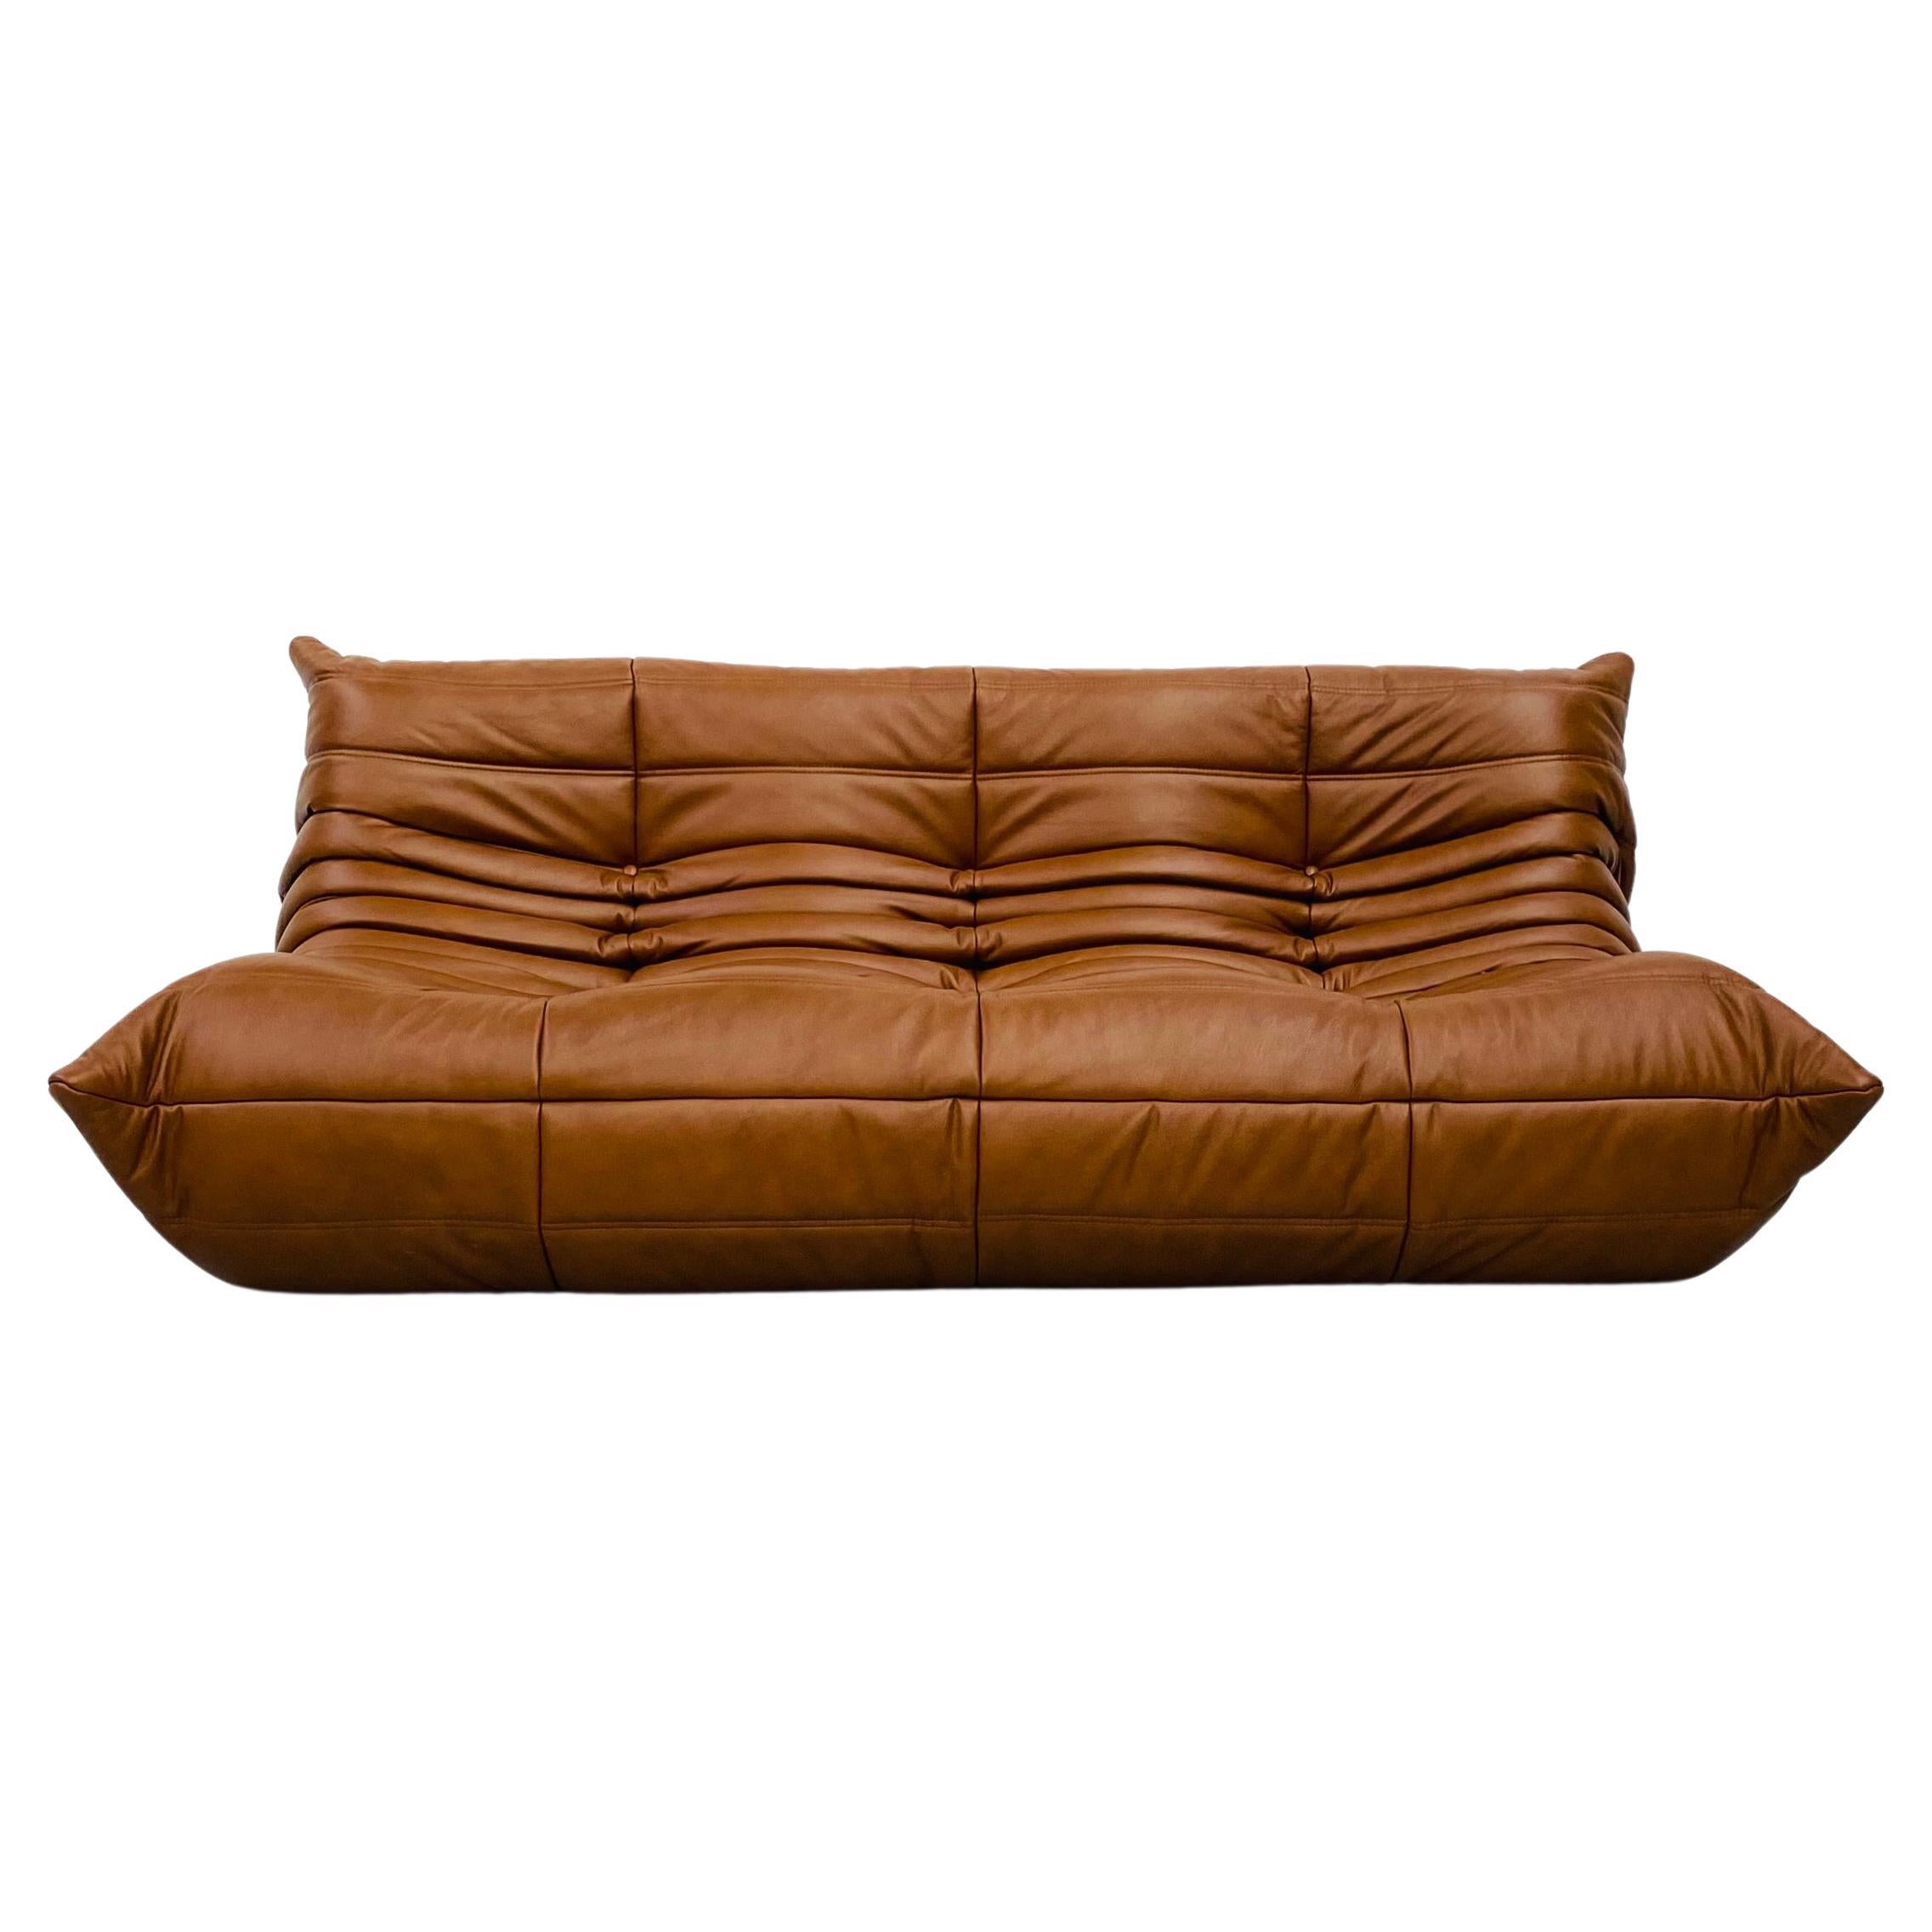 French Togo Sofa in Dark Cognac Leather by Michel Ducaroy for Ligne Roset, 1974